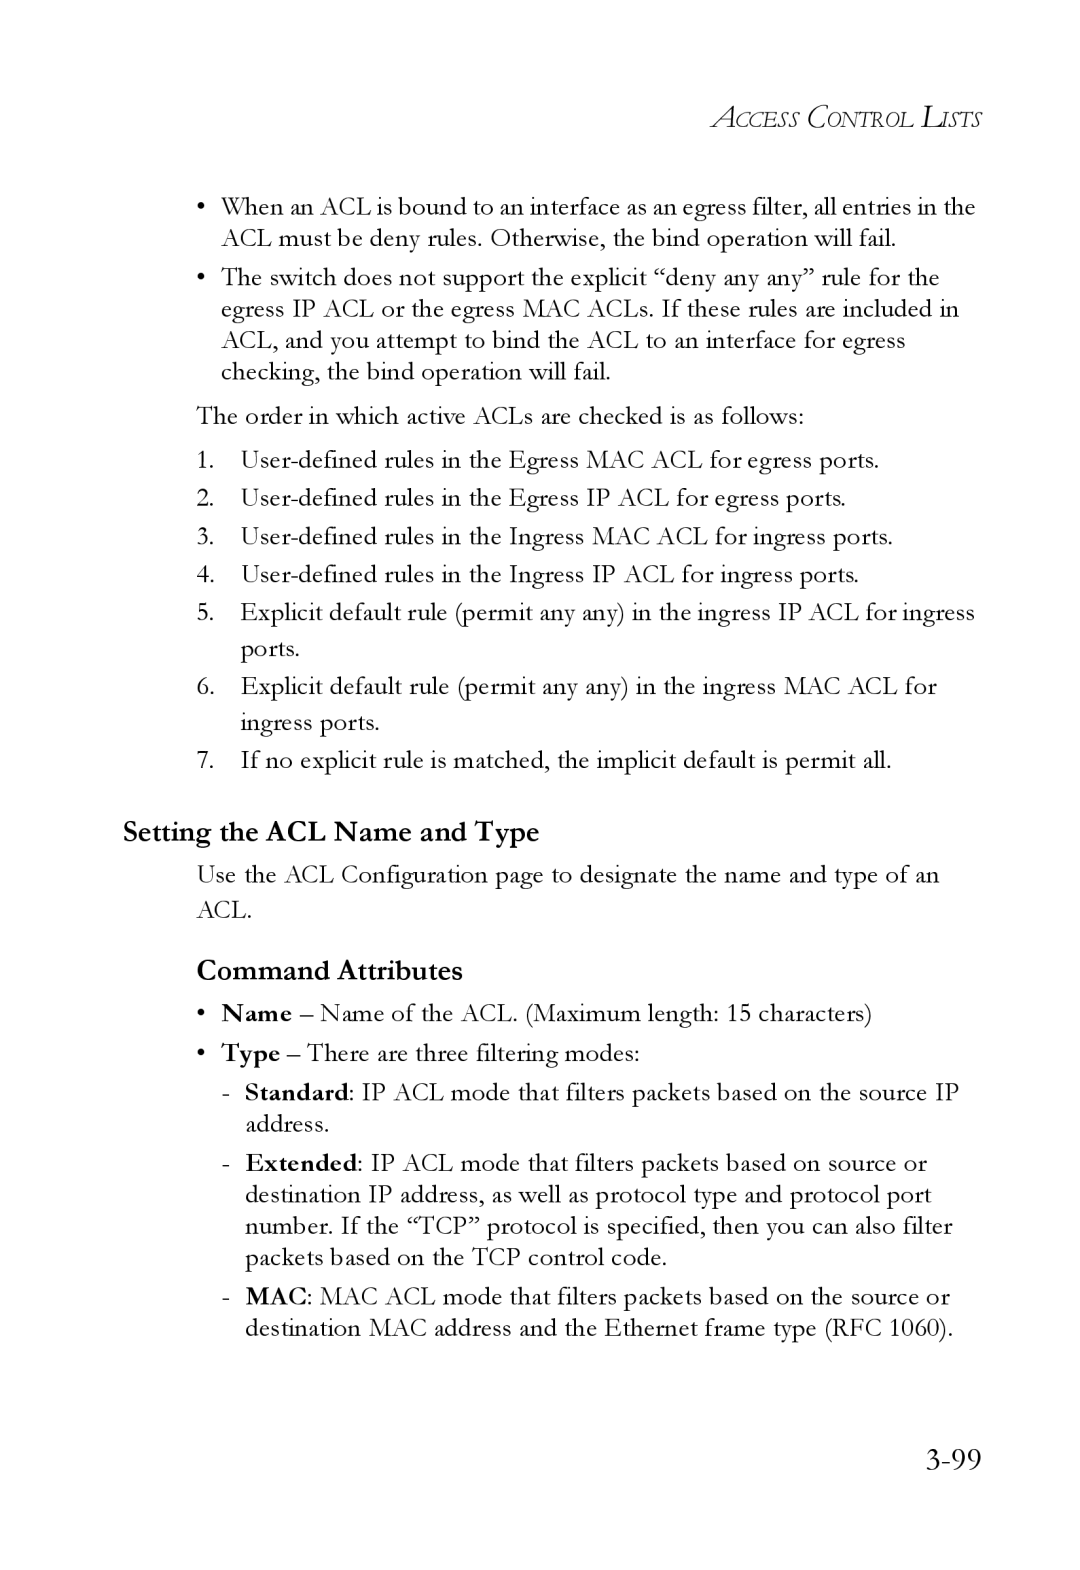 SMC Networks SMC6824M manual Setting the ACL Name and Type, Command Attributes 